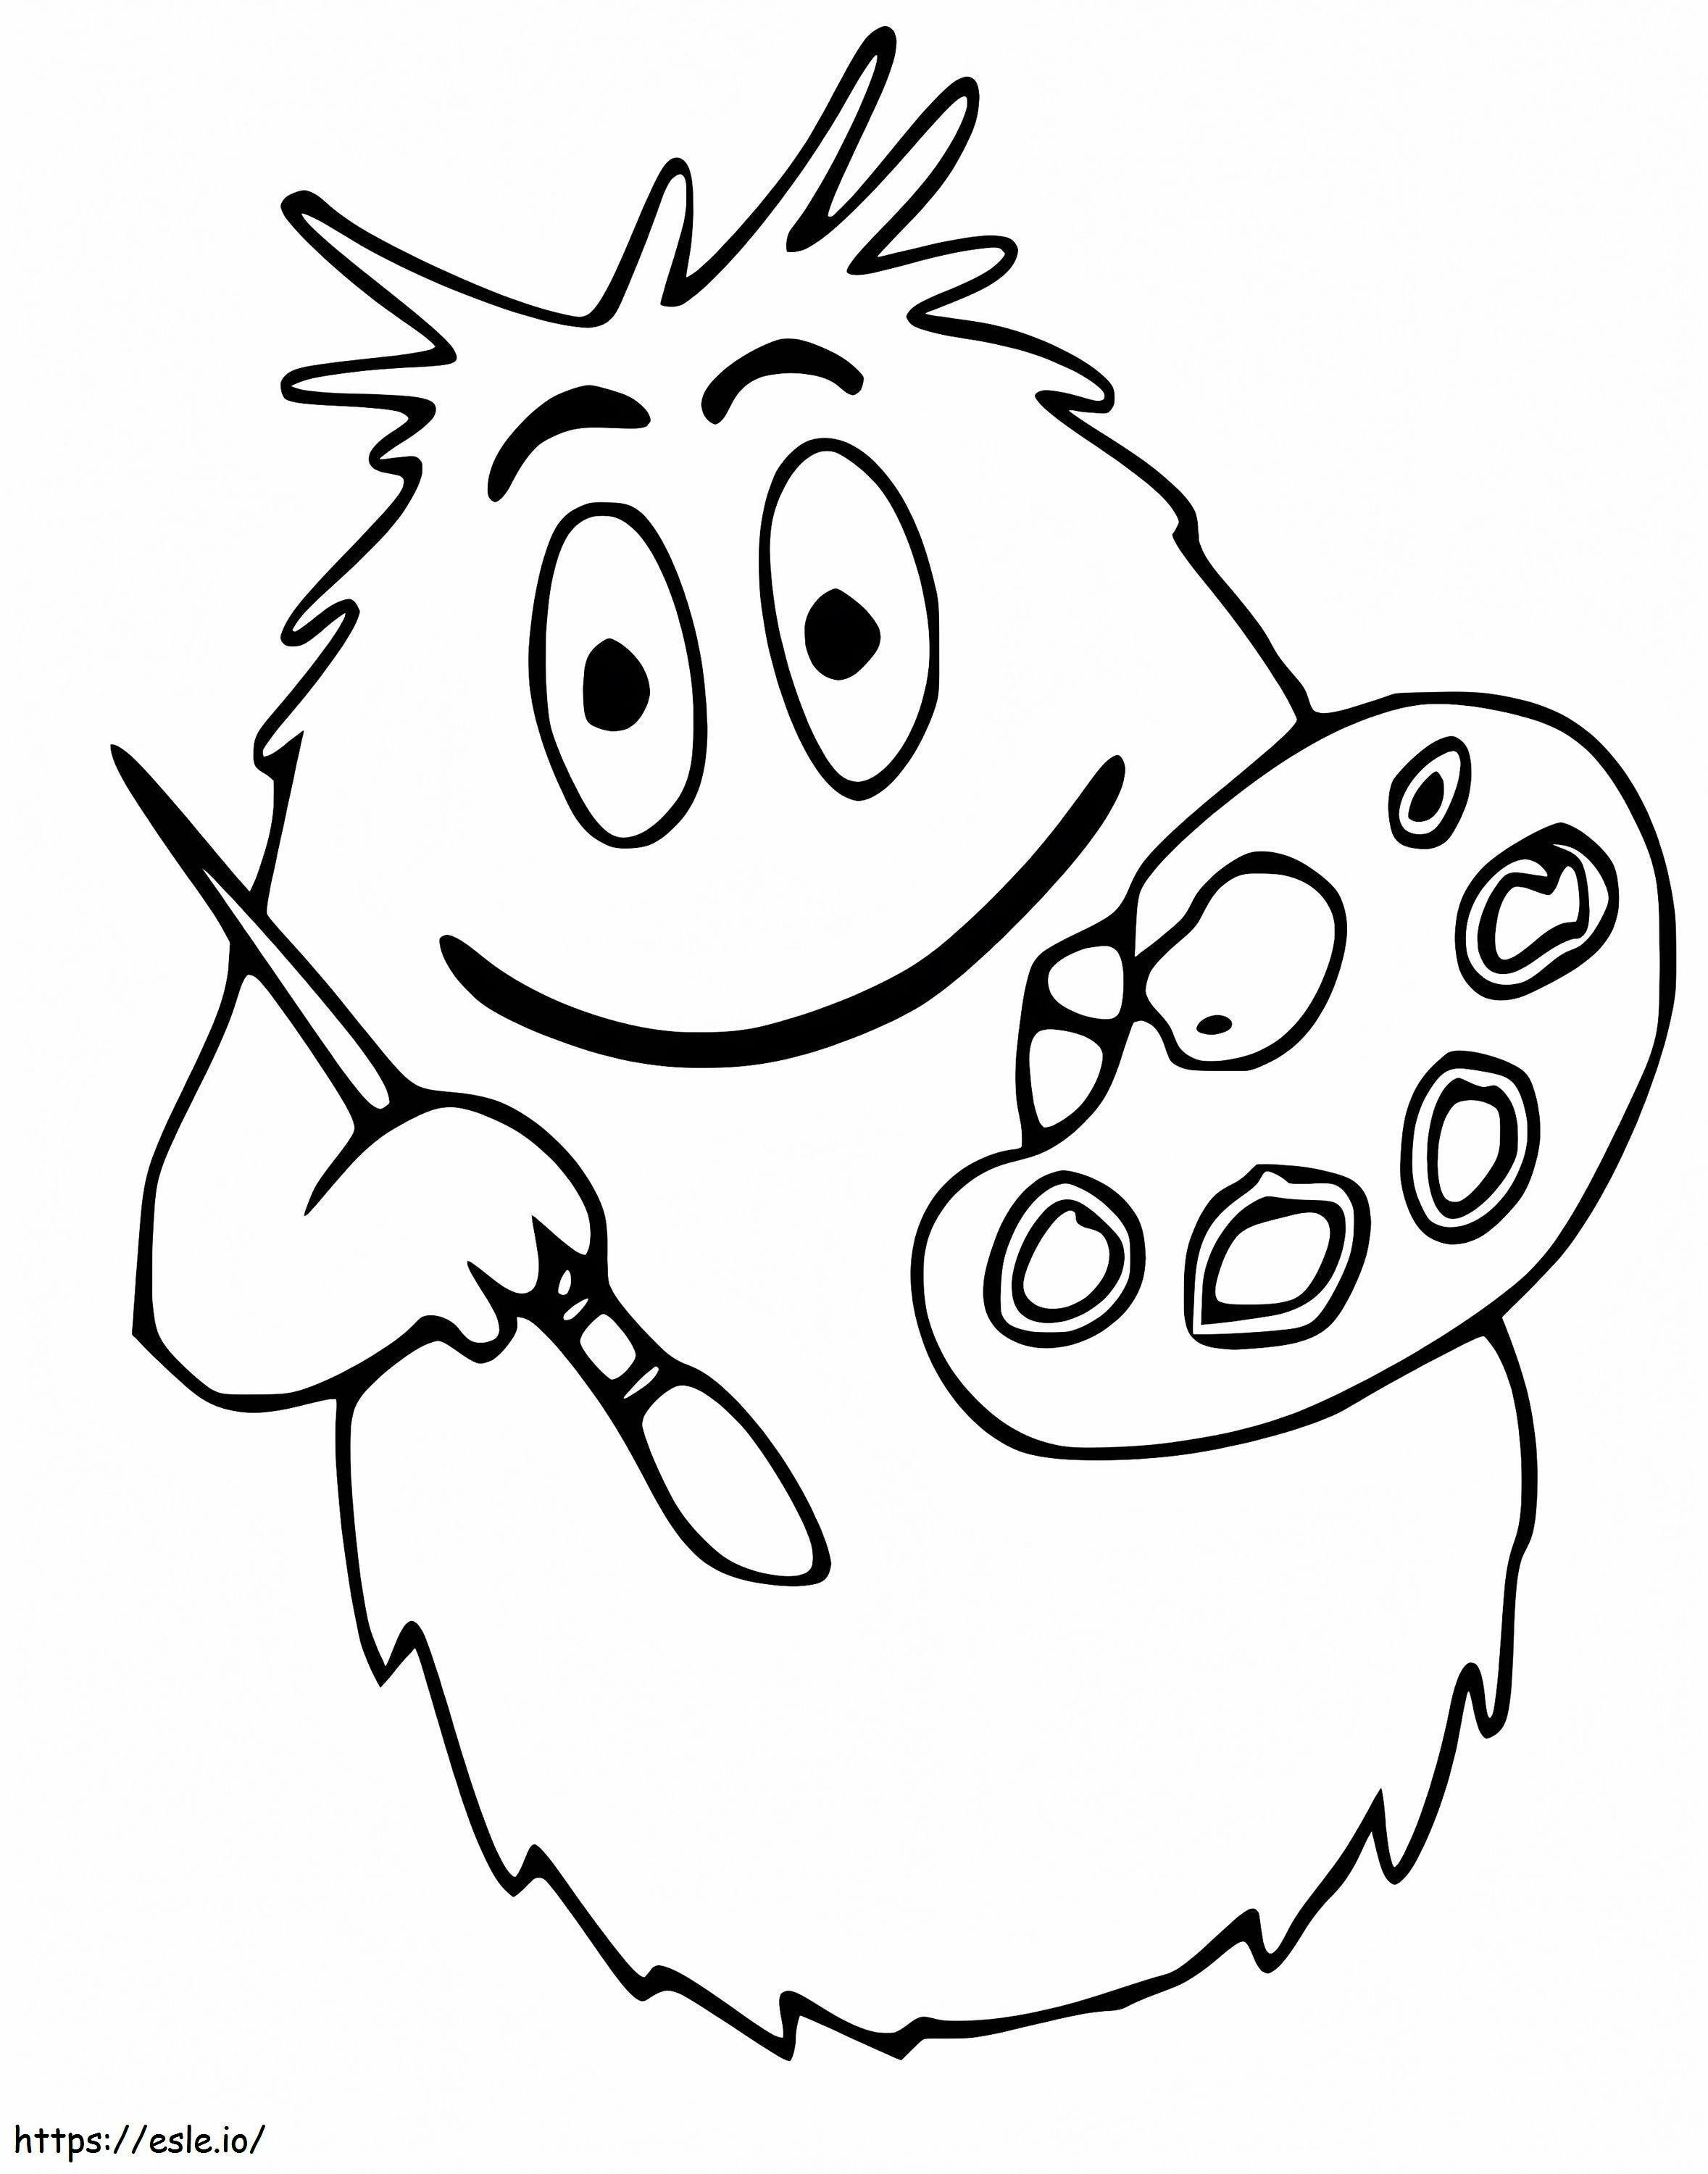 Barbabeau coloring page